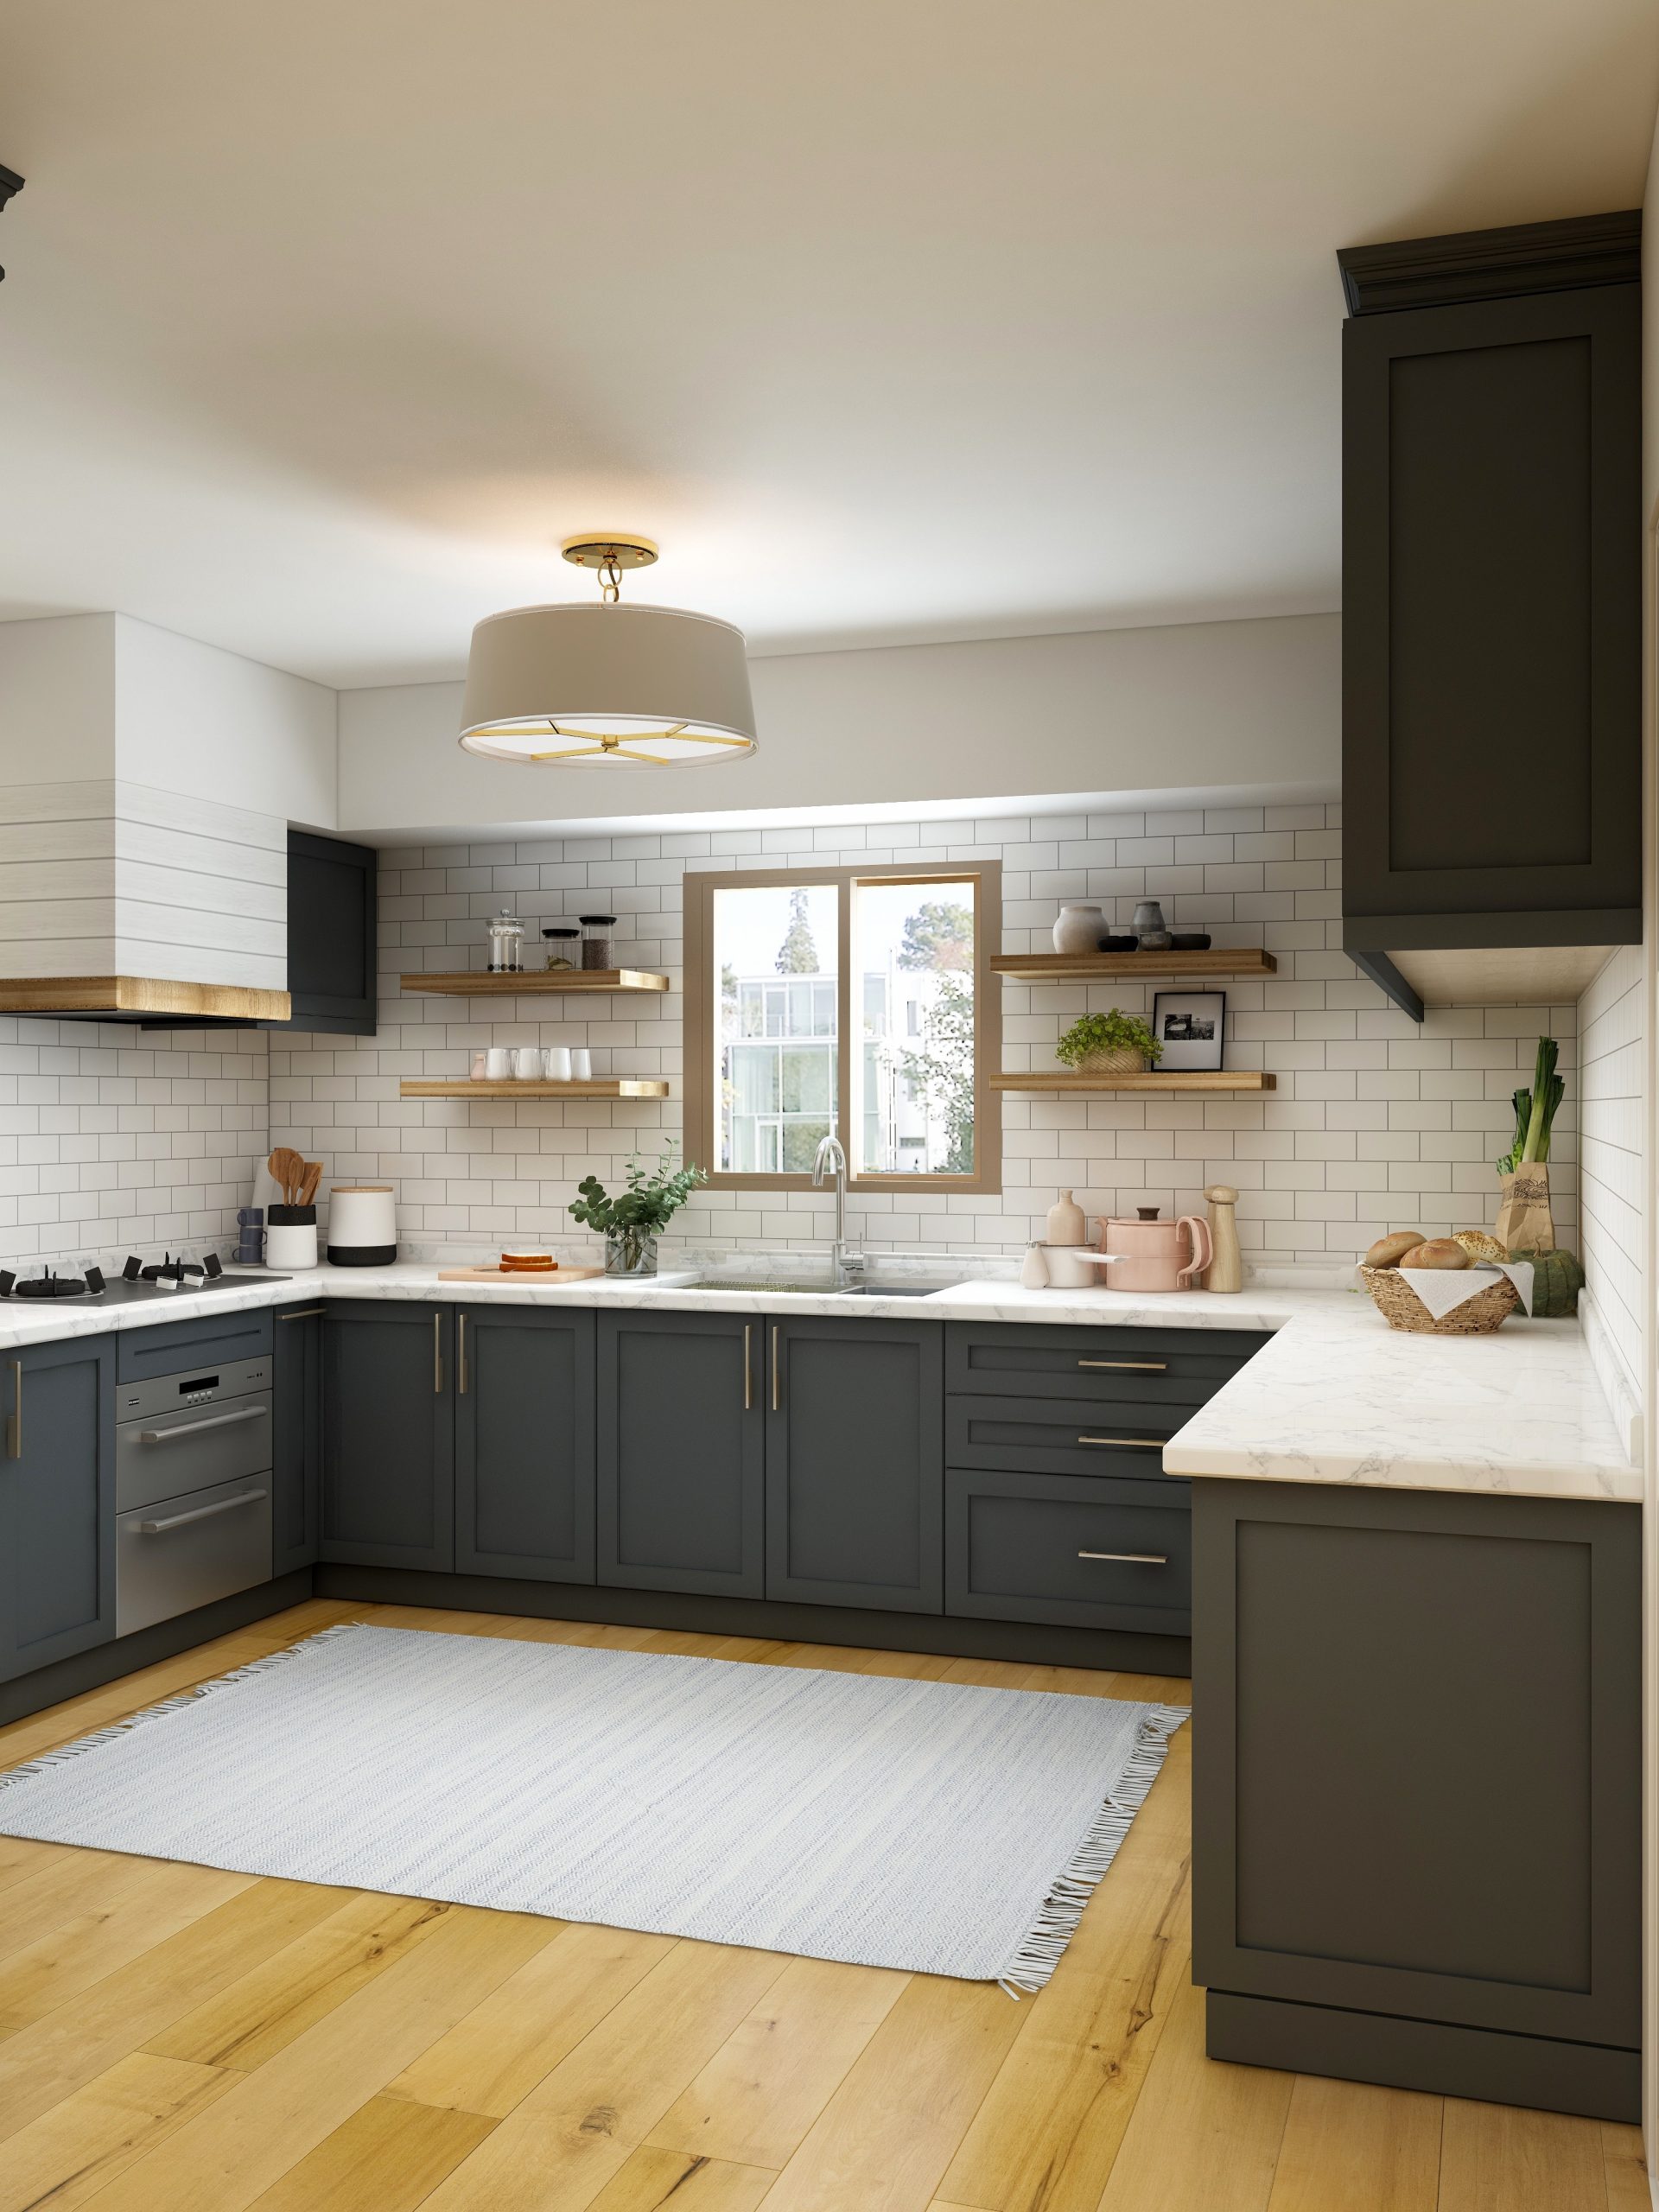 Cream Kitchen Cabinets: Style and Paint Color Options